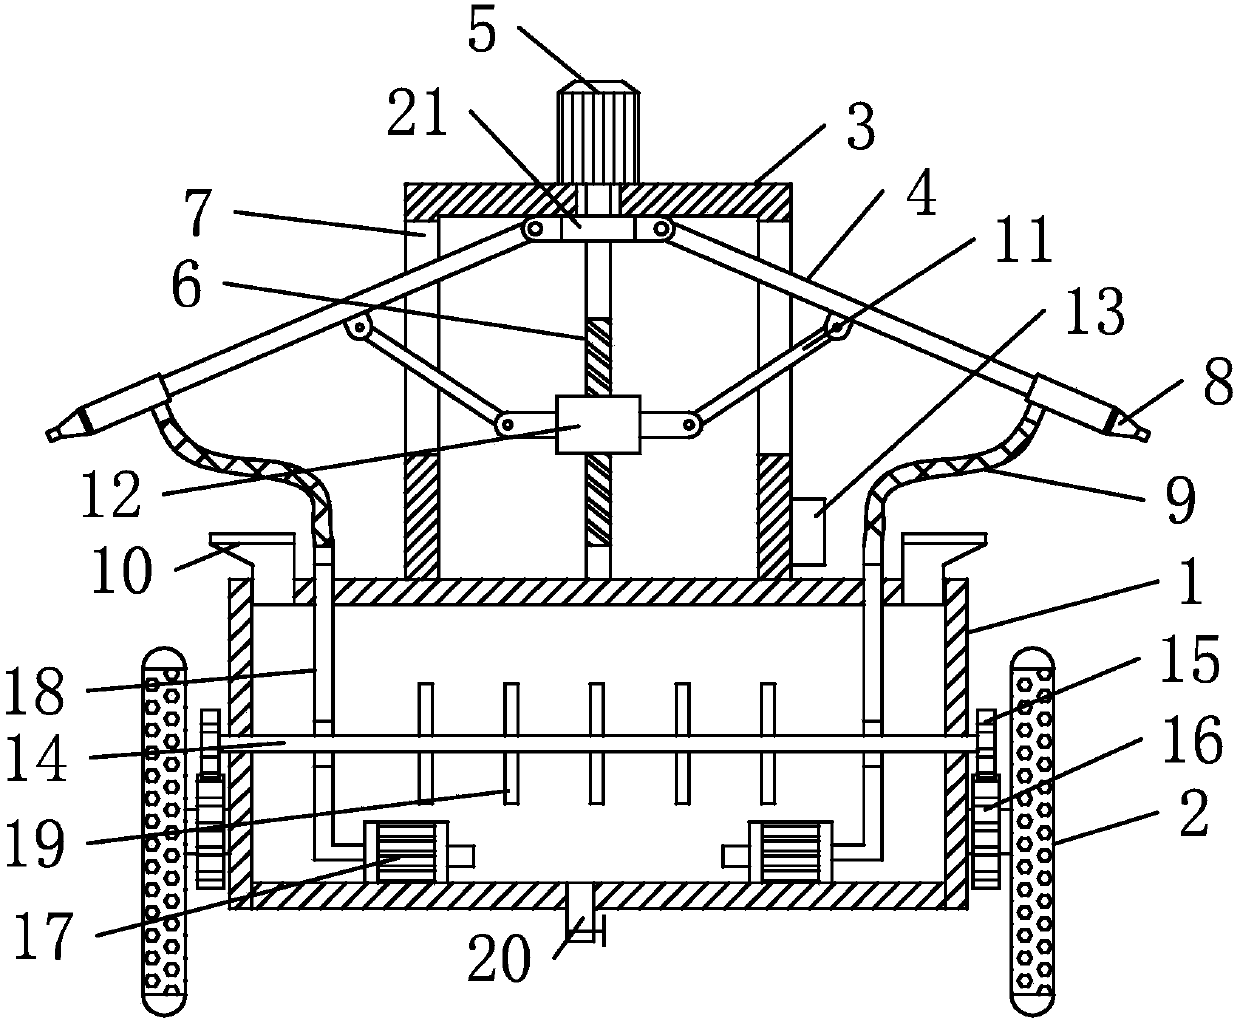 Double-arm type agricultural irrigation device with adjustable angle